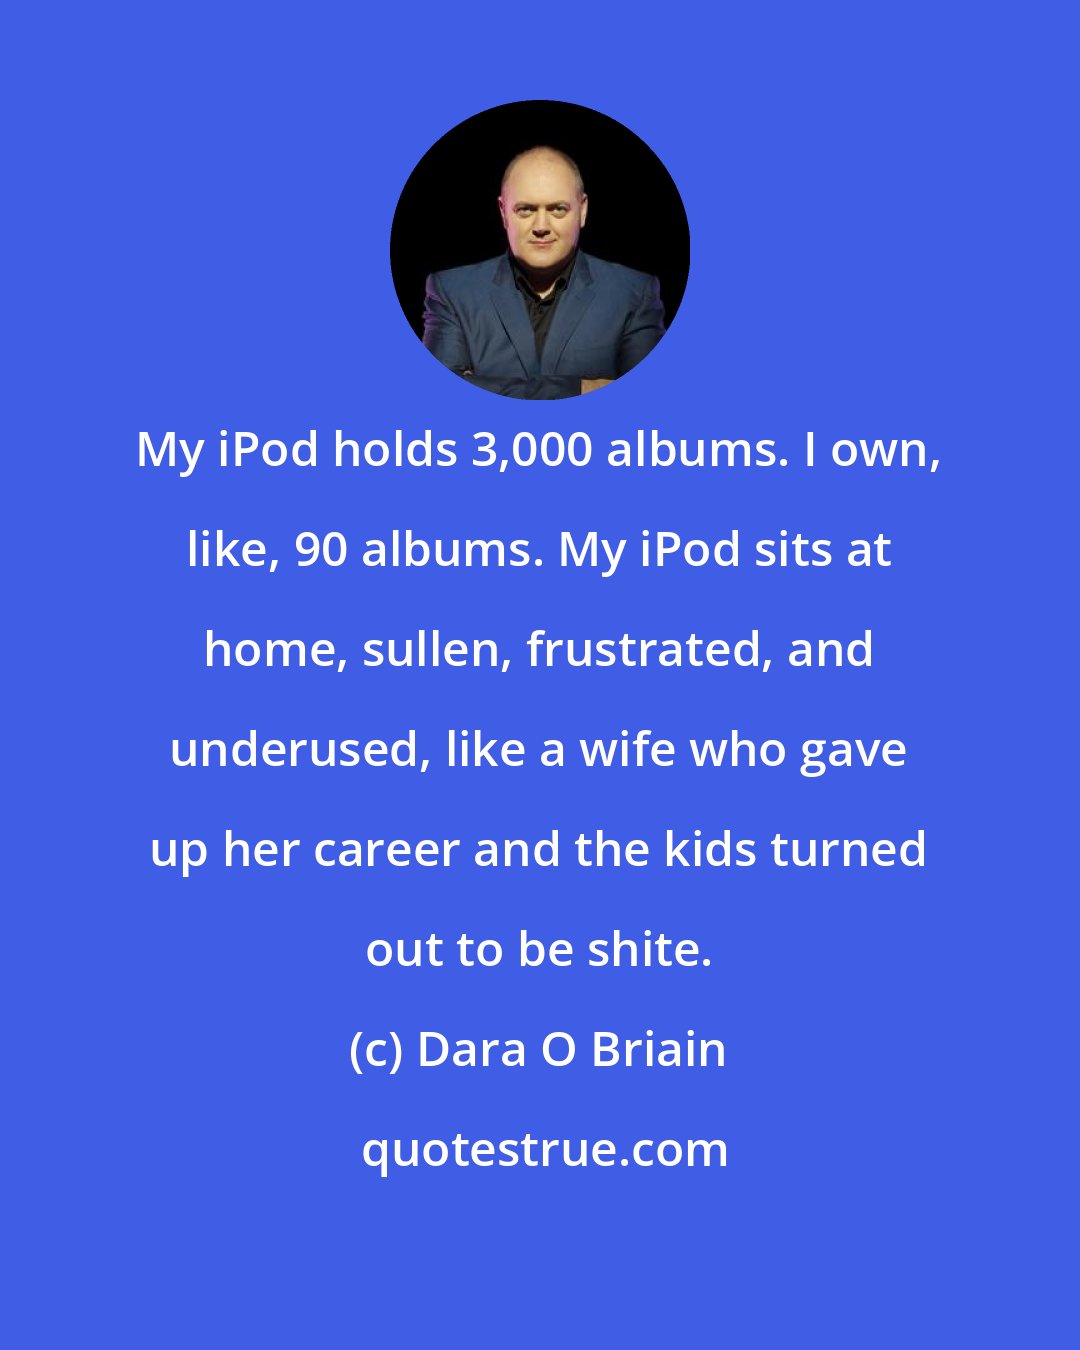 Dara O Briain: My iPod holds 3,000 albums. I own, like, 90 albums. My iPod sits at home, sullen, frustrated, and underused, like a wife who gave up her career and the kids turned out to be shite.